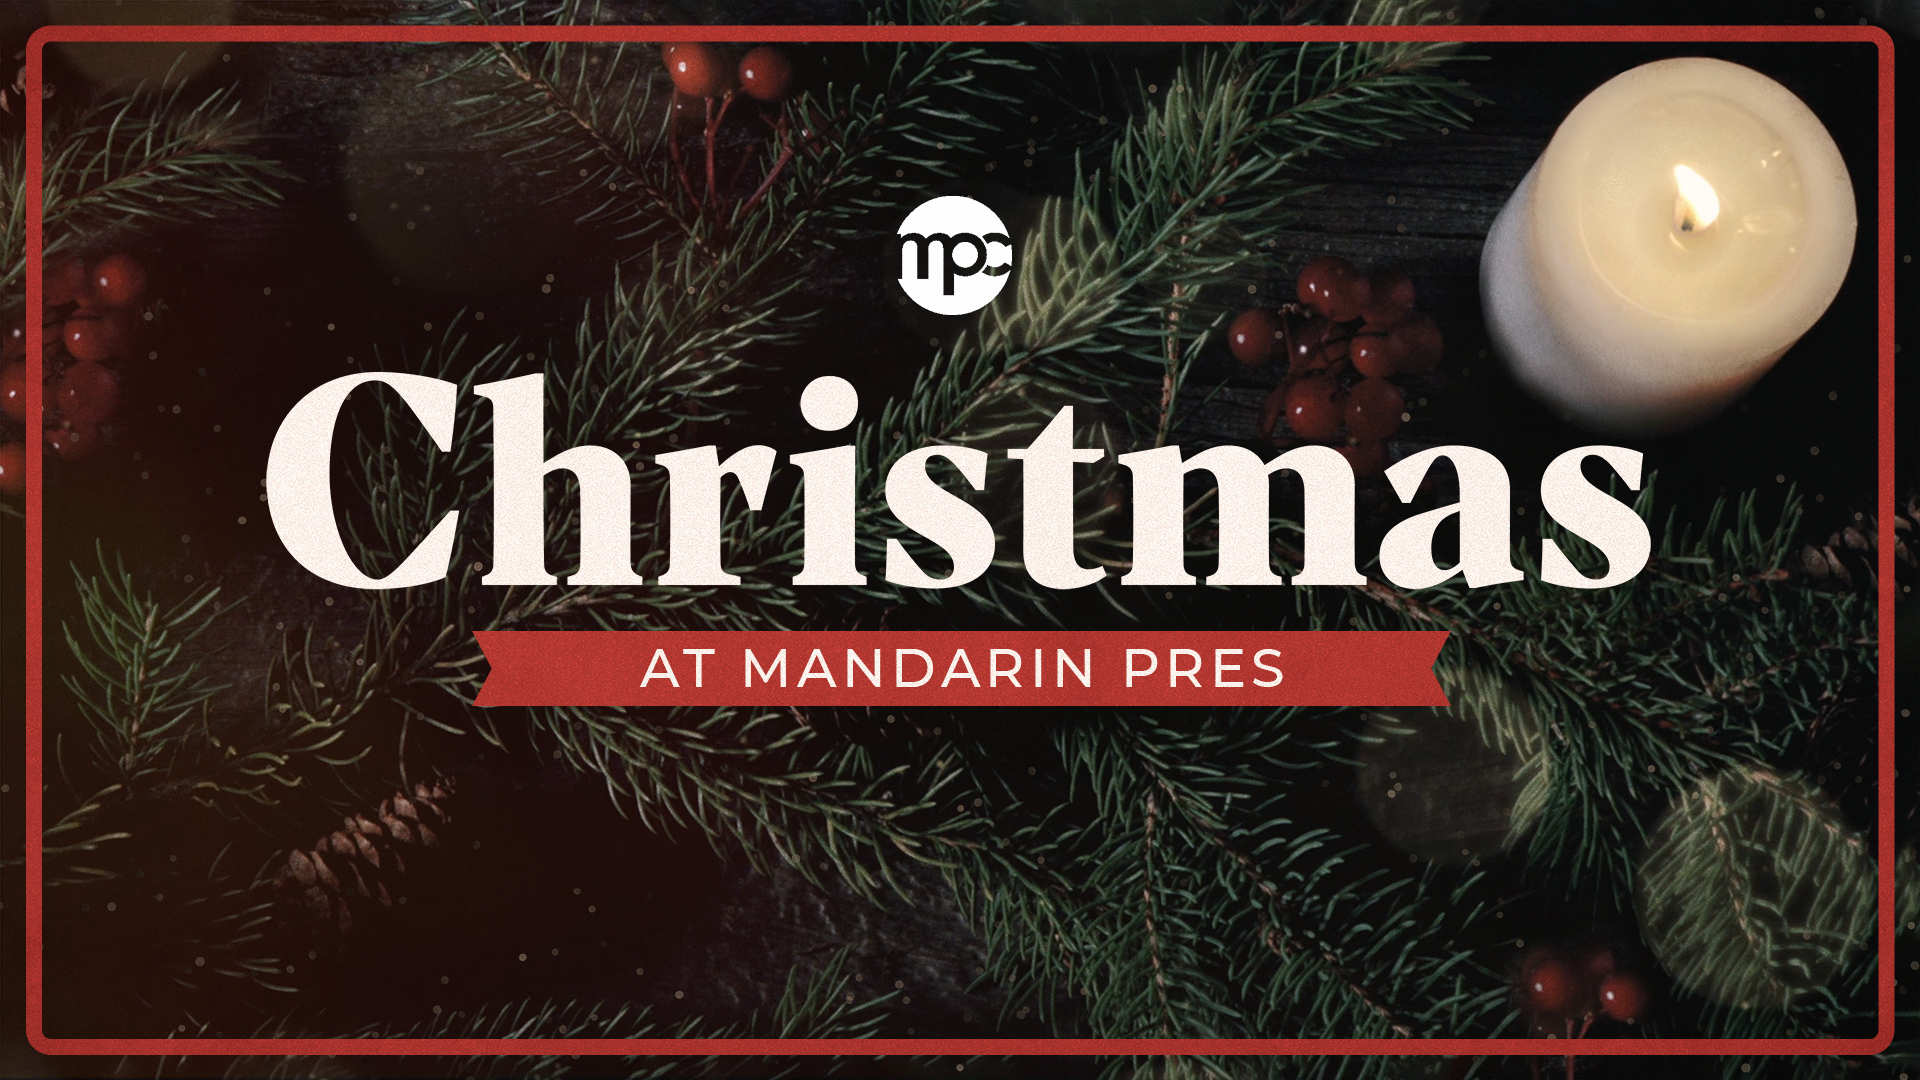 Christmas at MPC

MPC offers several events throughout the holiday season.
